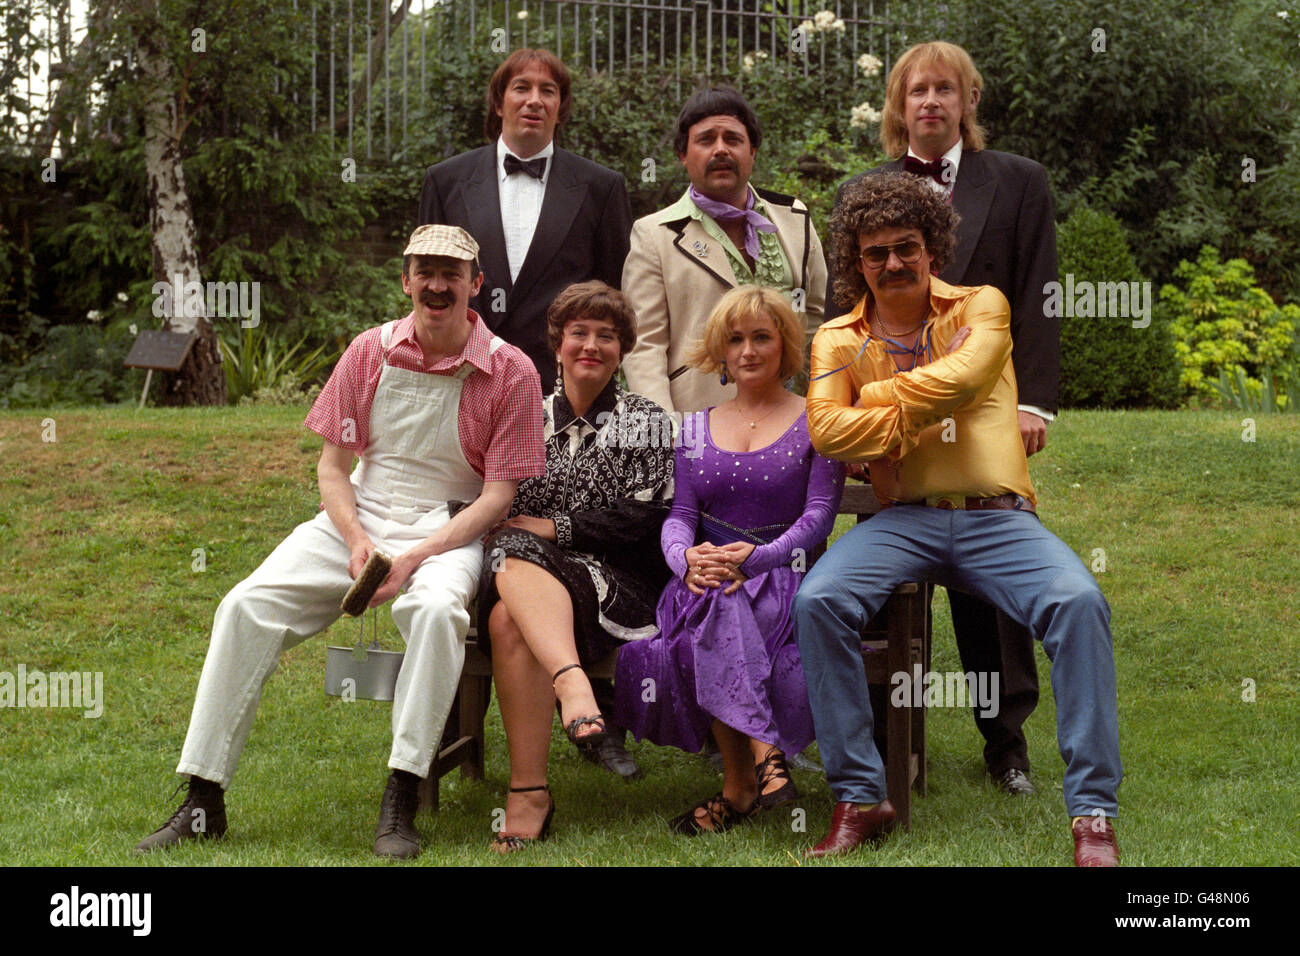 A group shot of the members of the BBC series 'The Fast Show', at a photocall. Back L-R Simon Day, John Thomson, Mark Williams. Front L-R Paul Whitehouse, Arabella Weir, Caroline Aherne, Charlie Higson. Stock Photo